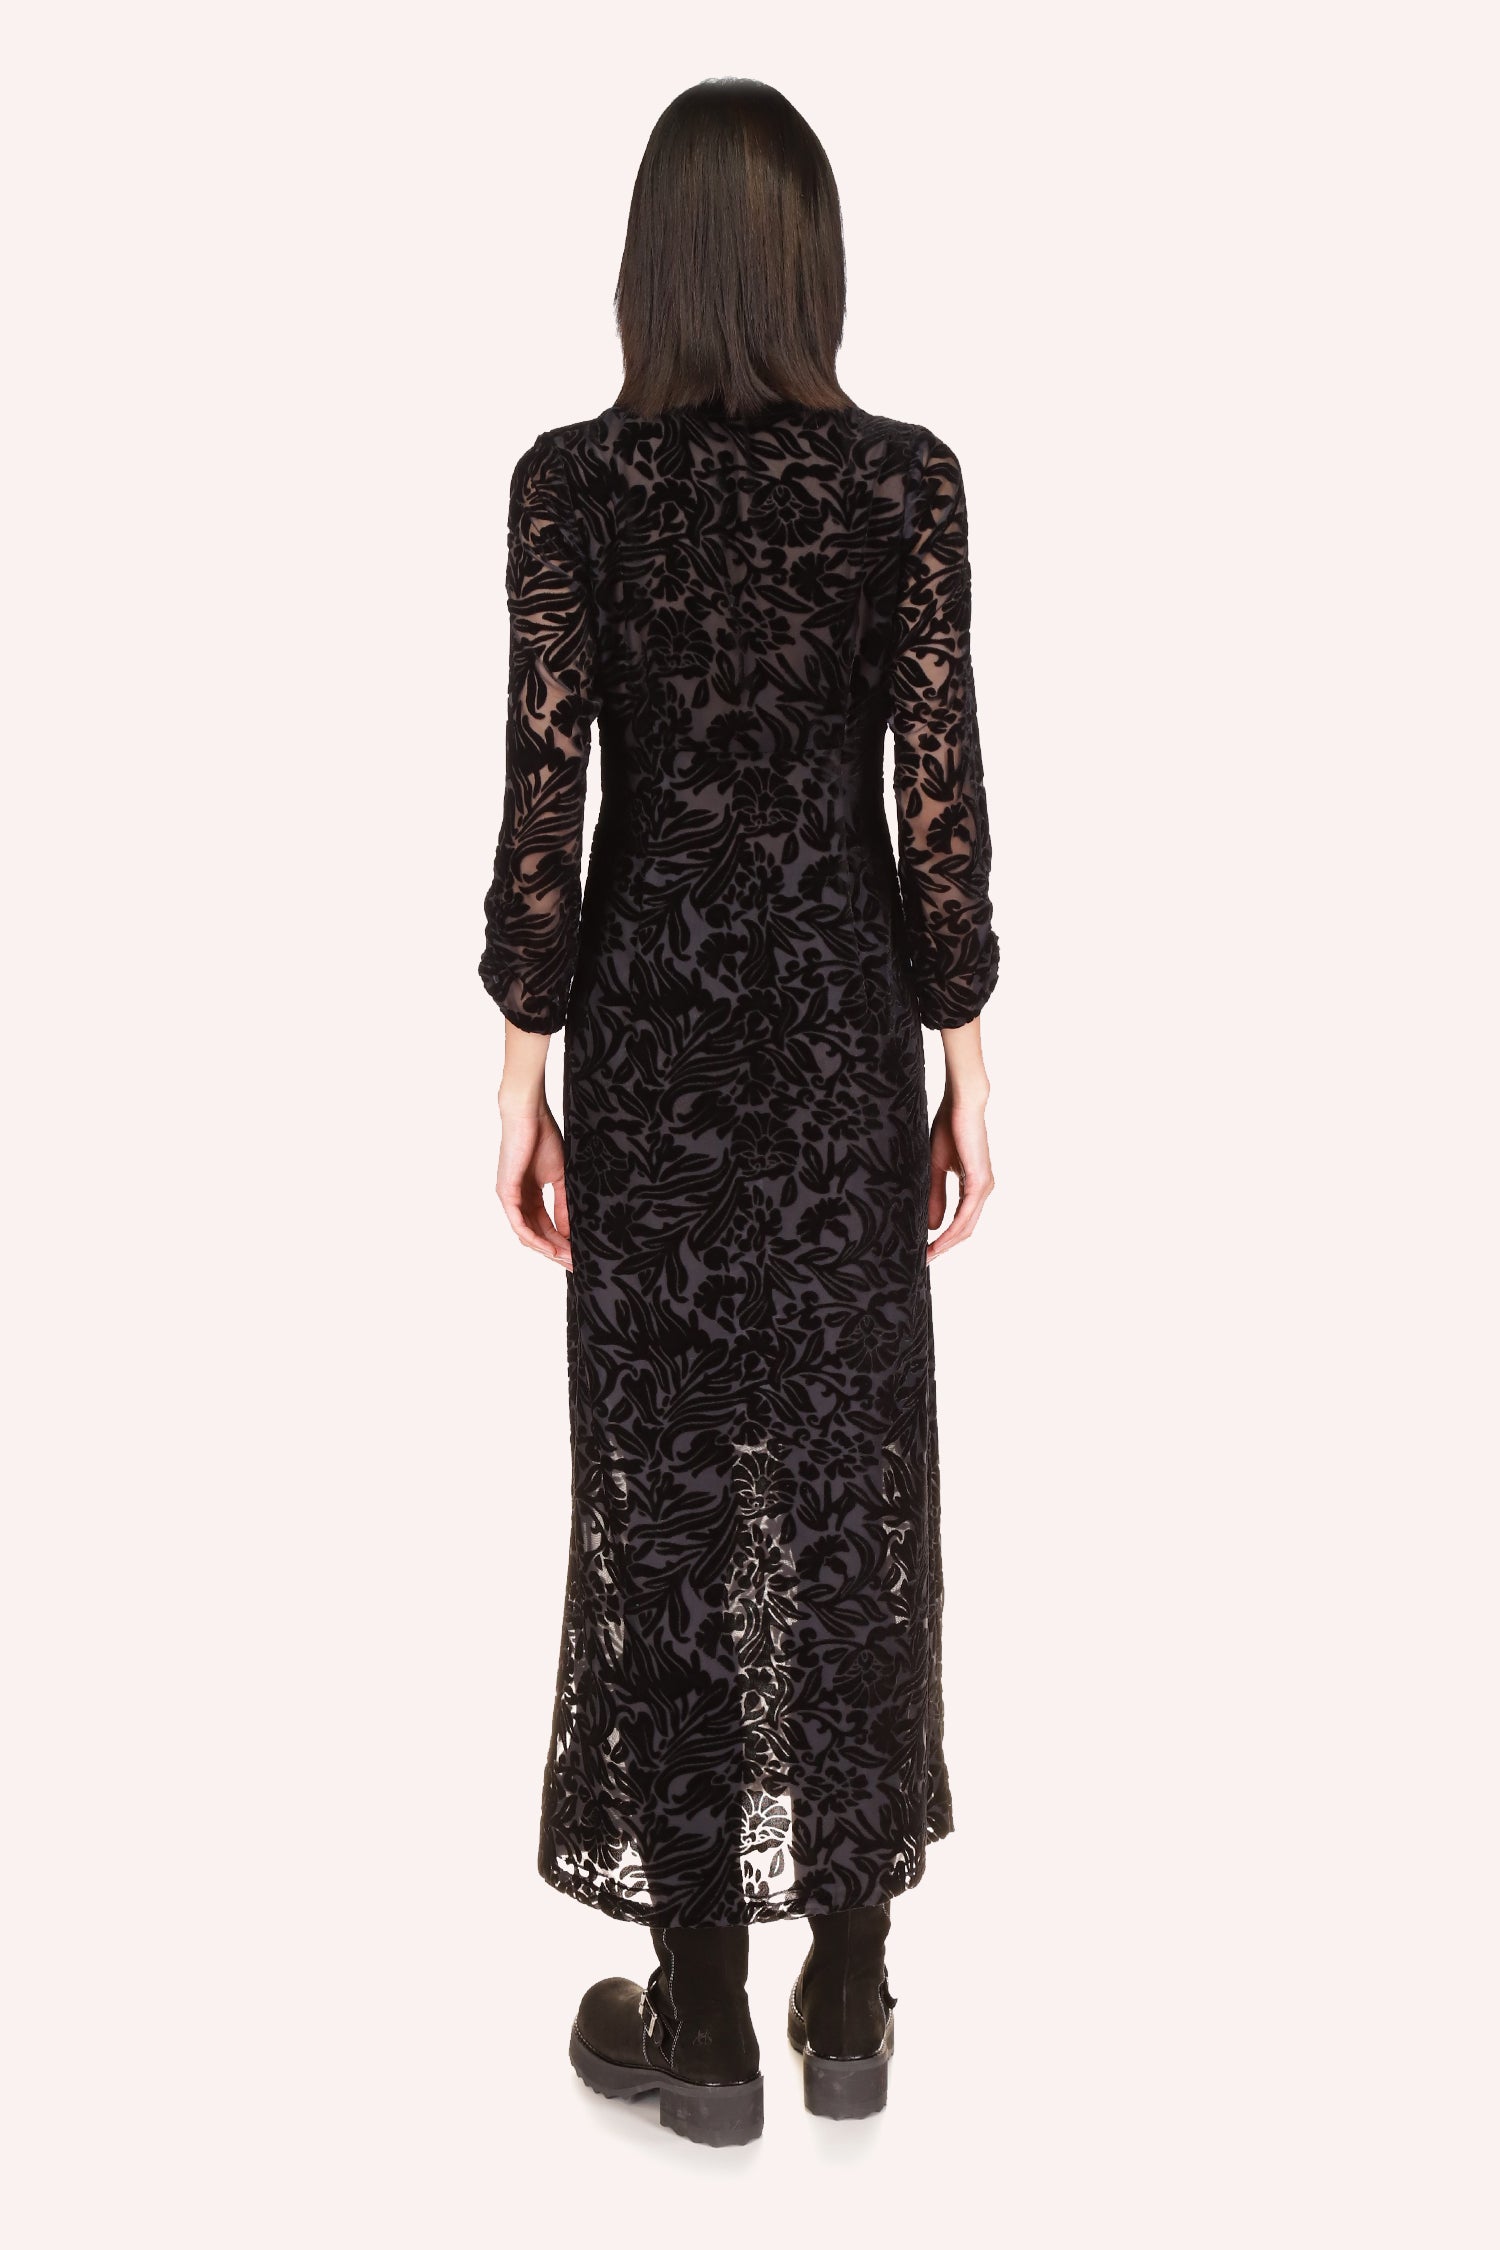 Ankle-length Dress has long sleeves, floral pattern on transparent texture